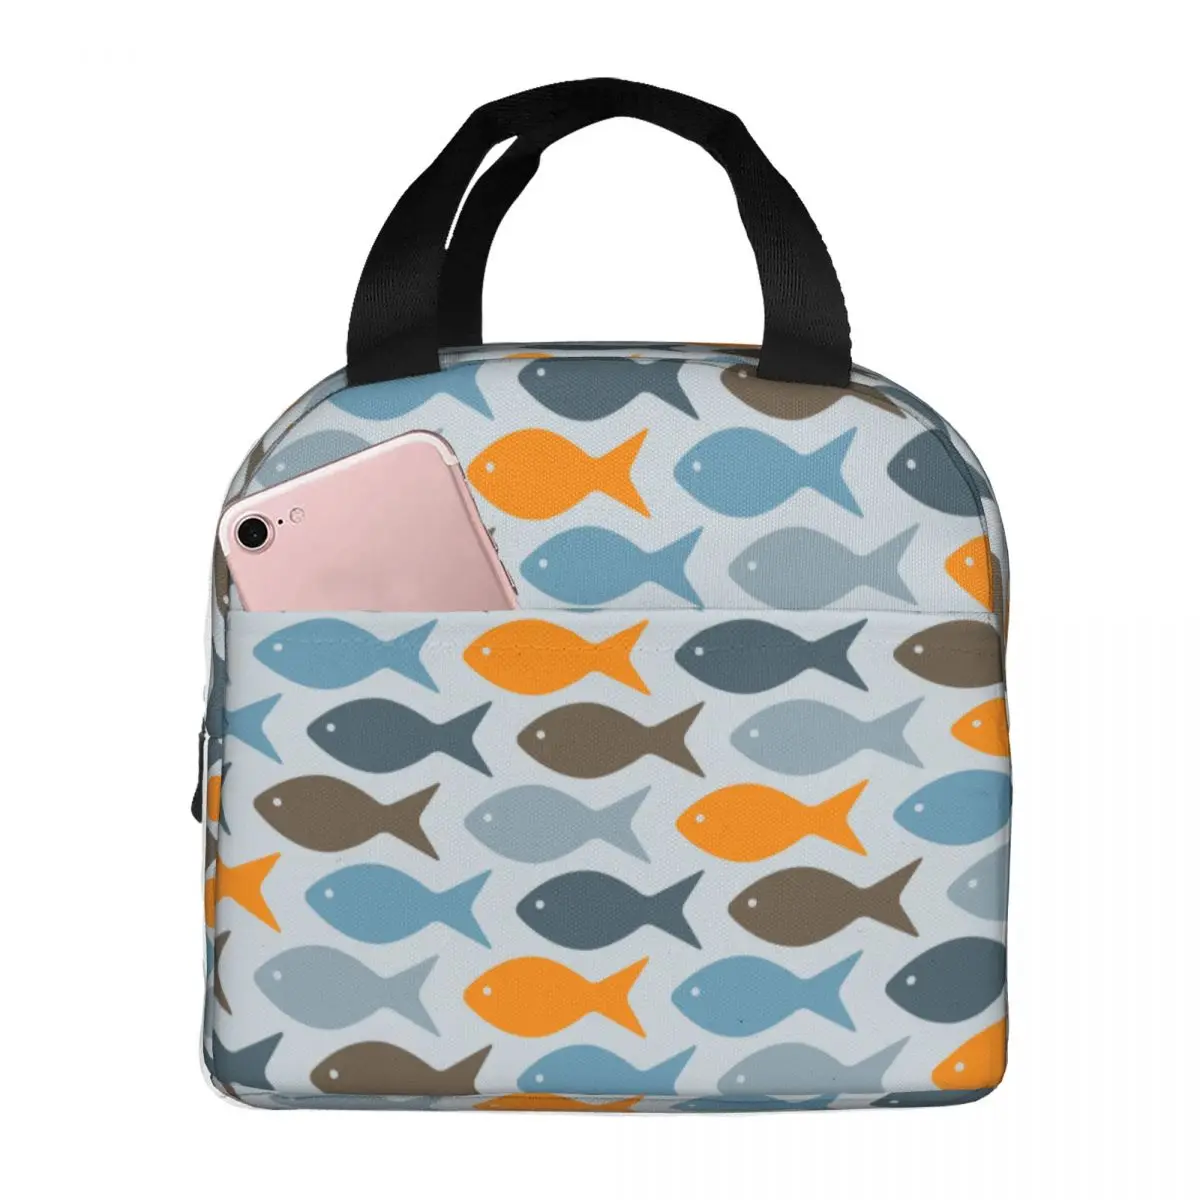 Colorful Fish Sea Pattern Lunch Bag Portable Insulated Oxford Cooler Bag Thermal Cold Food Picnic Lunch Box for Women Kids